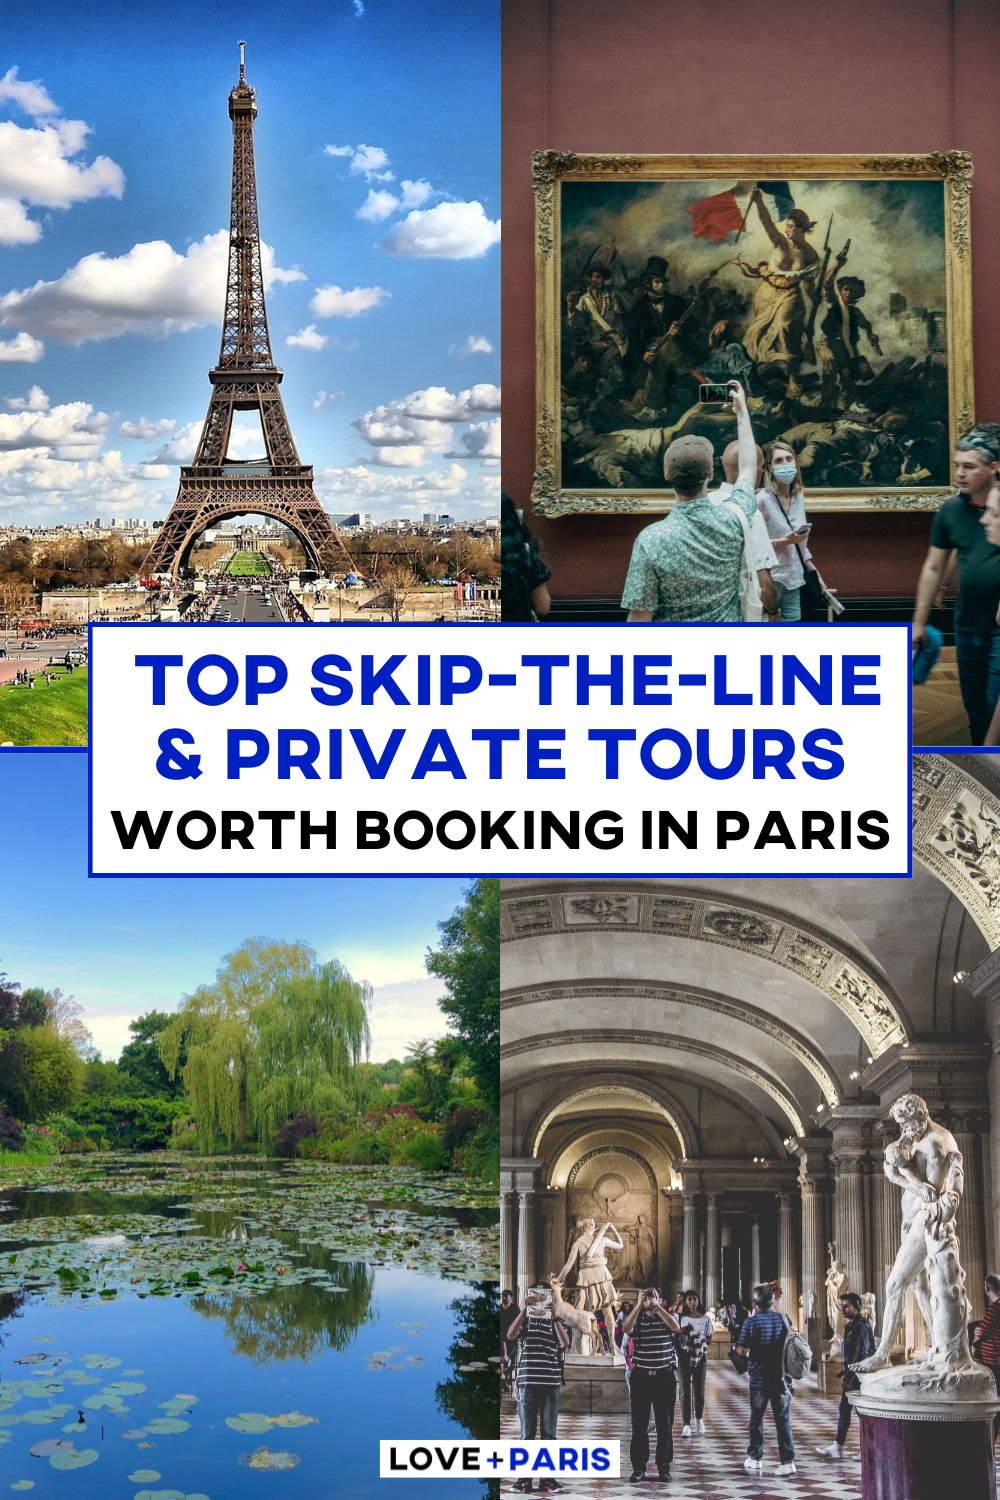 This is a Pinterest pin detailing the top skip-the-line and private tours worth booking in Paris.